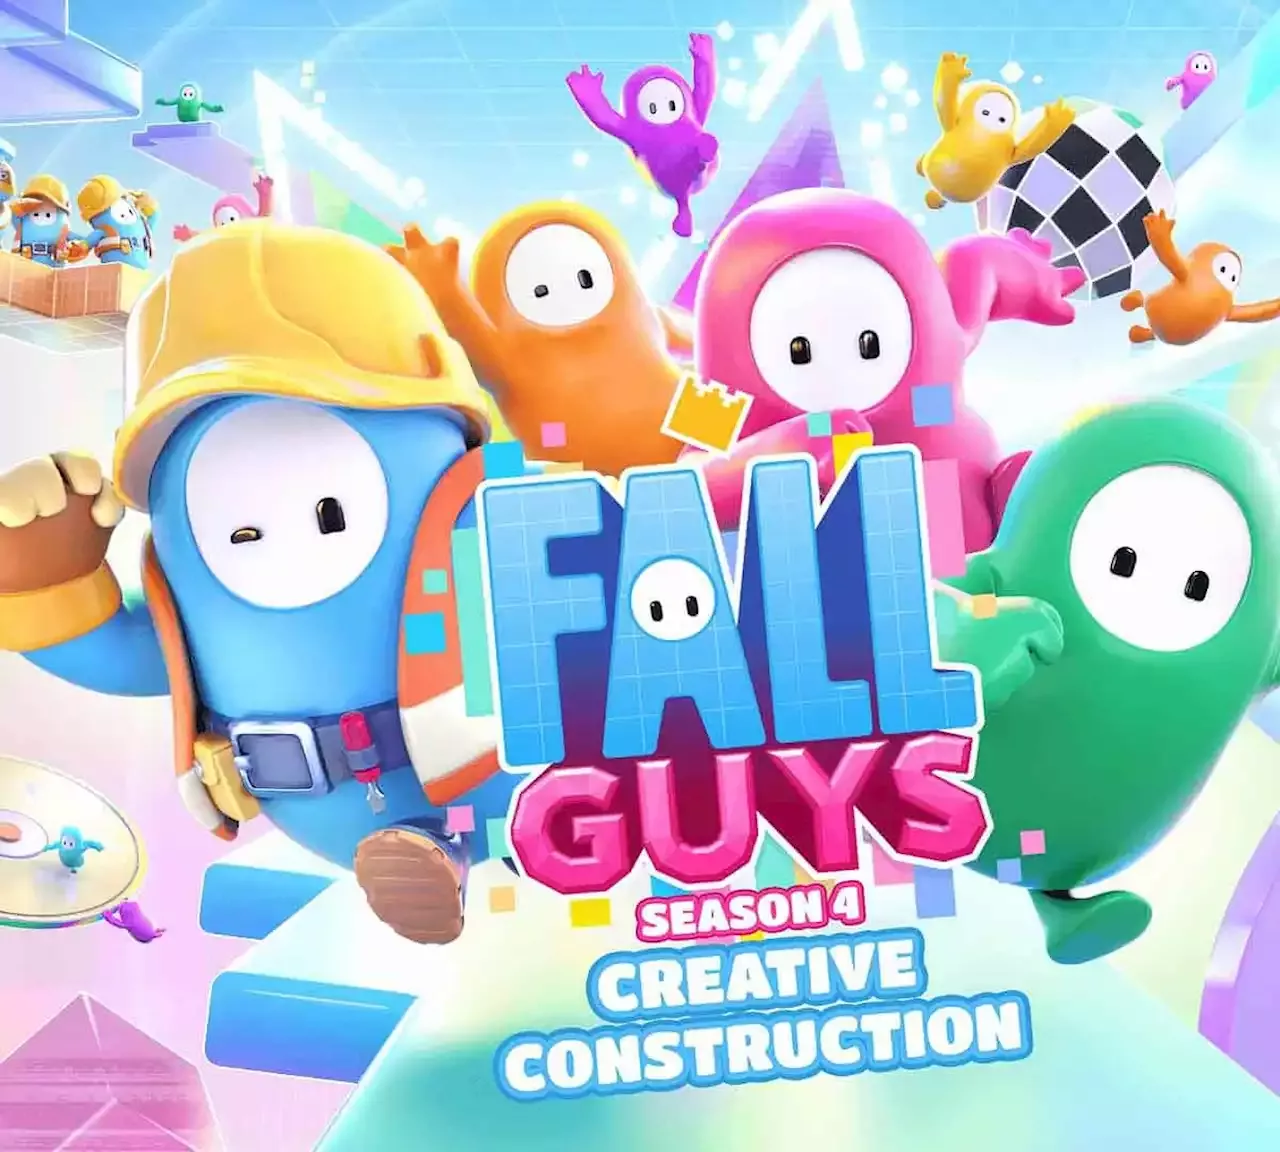 Fall Guys season 4 introduces level builder and Fame Passes